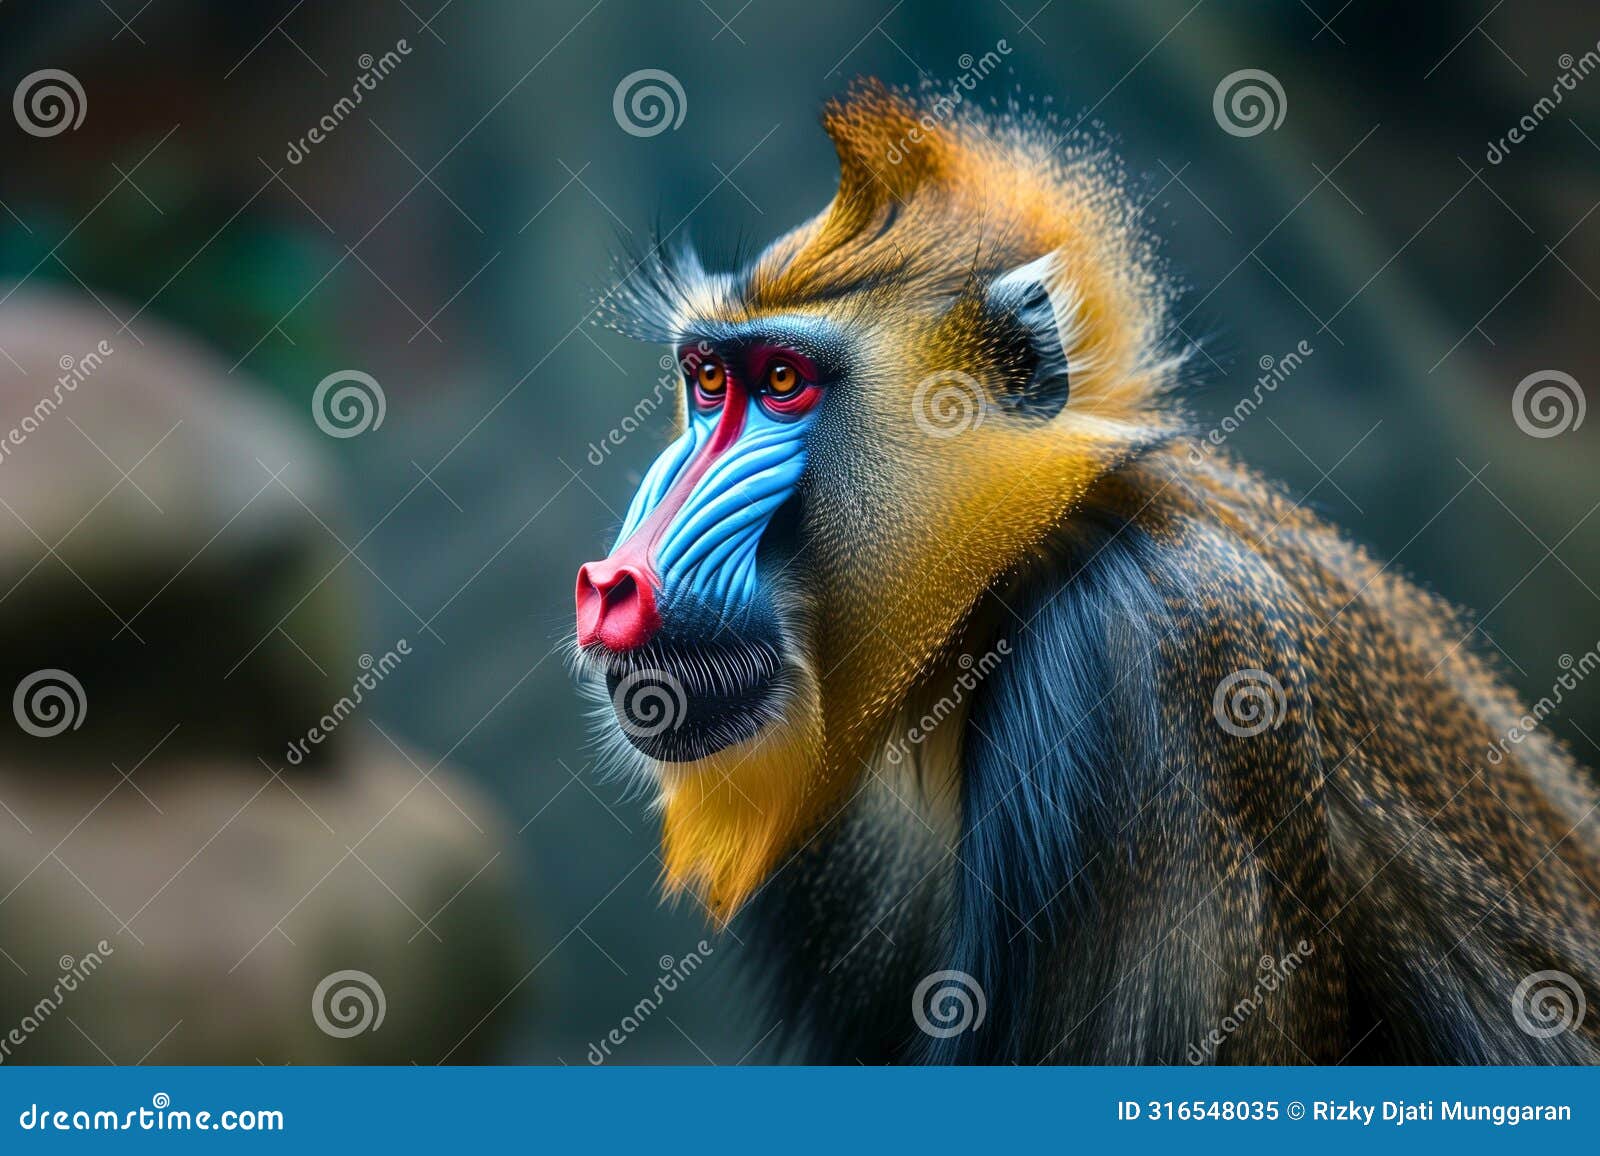 a male mandrill with its vibrant blue and red facial markings on full display